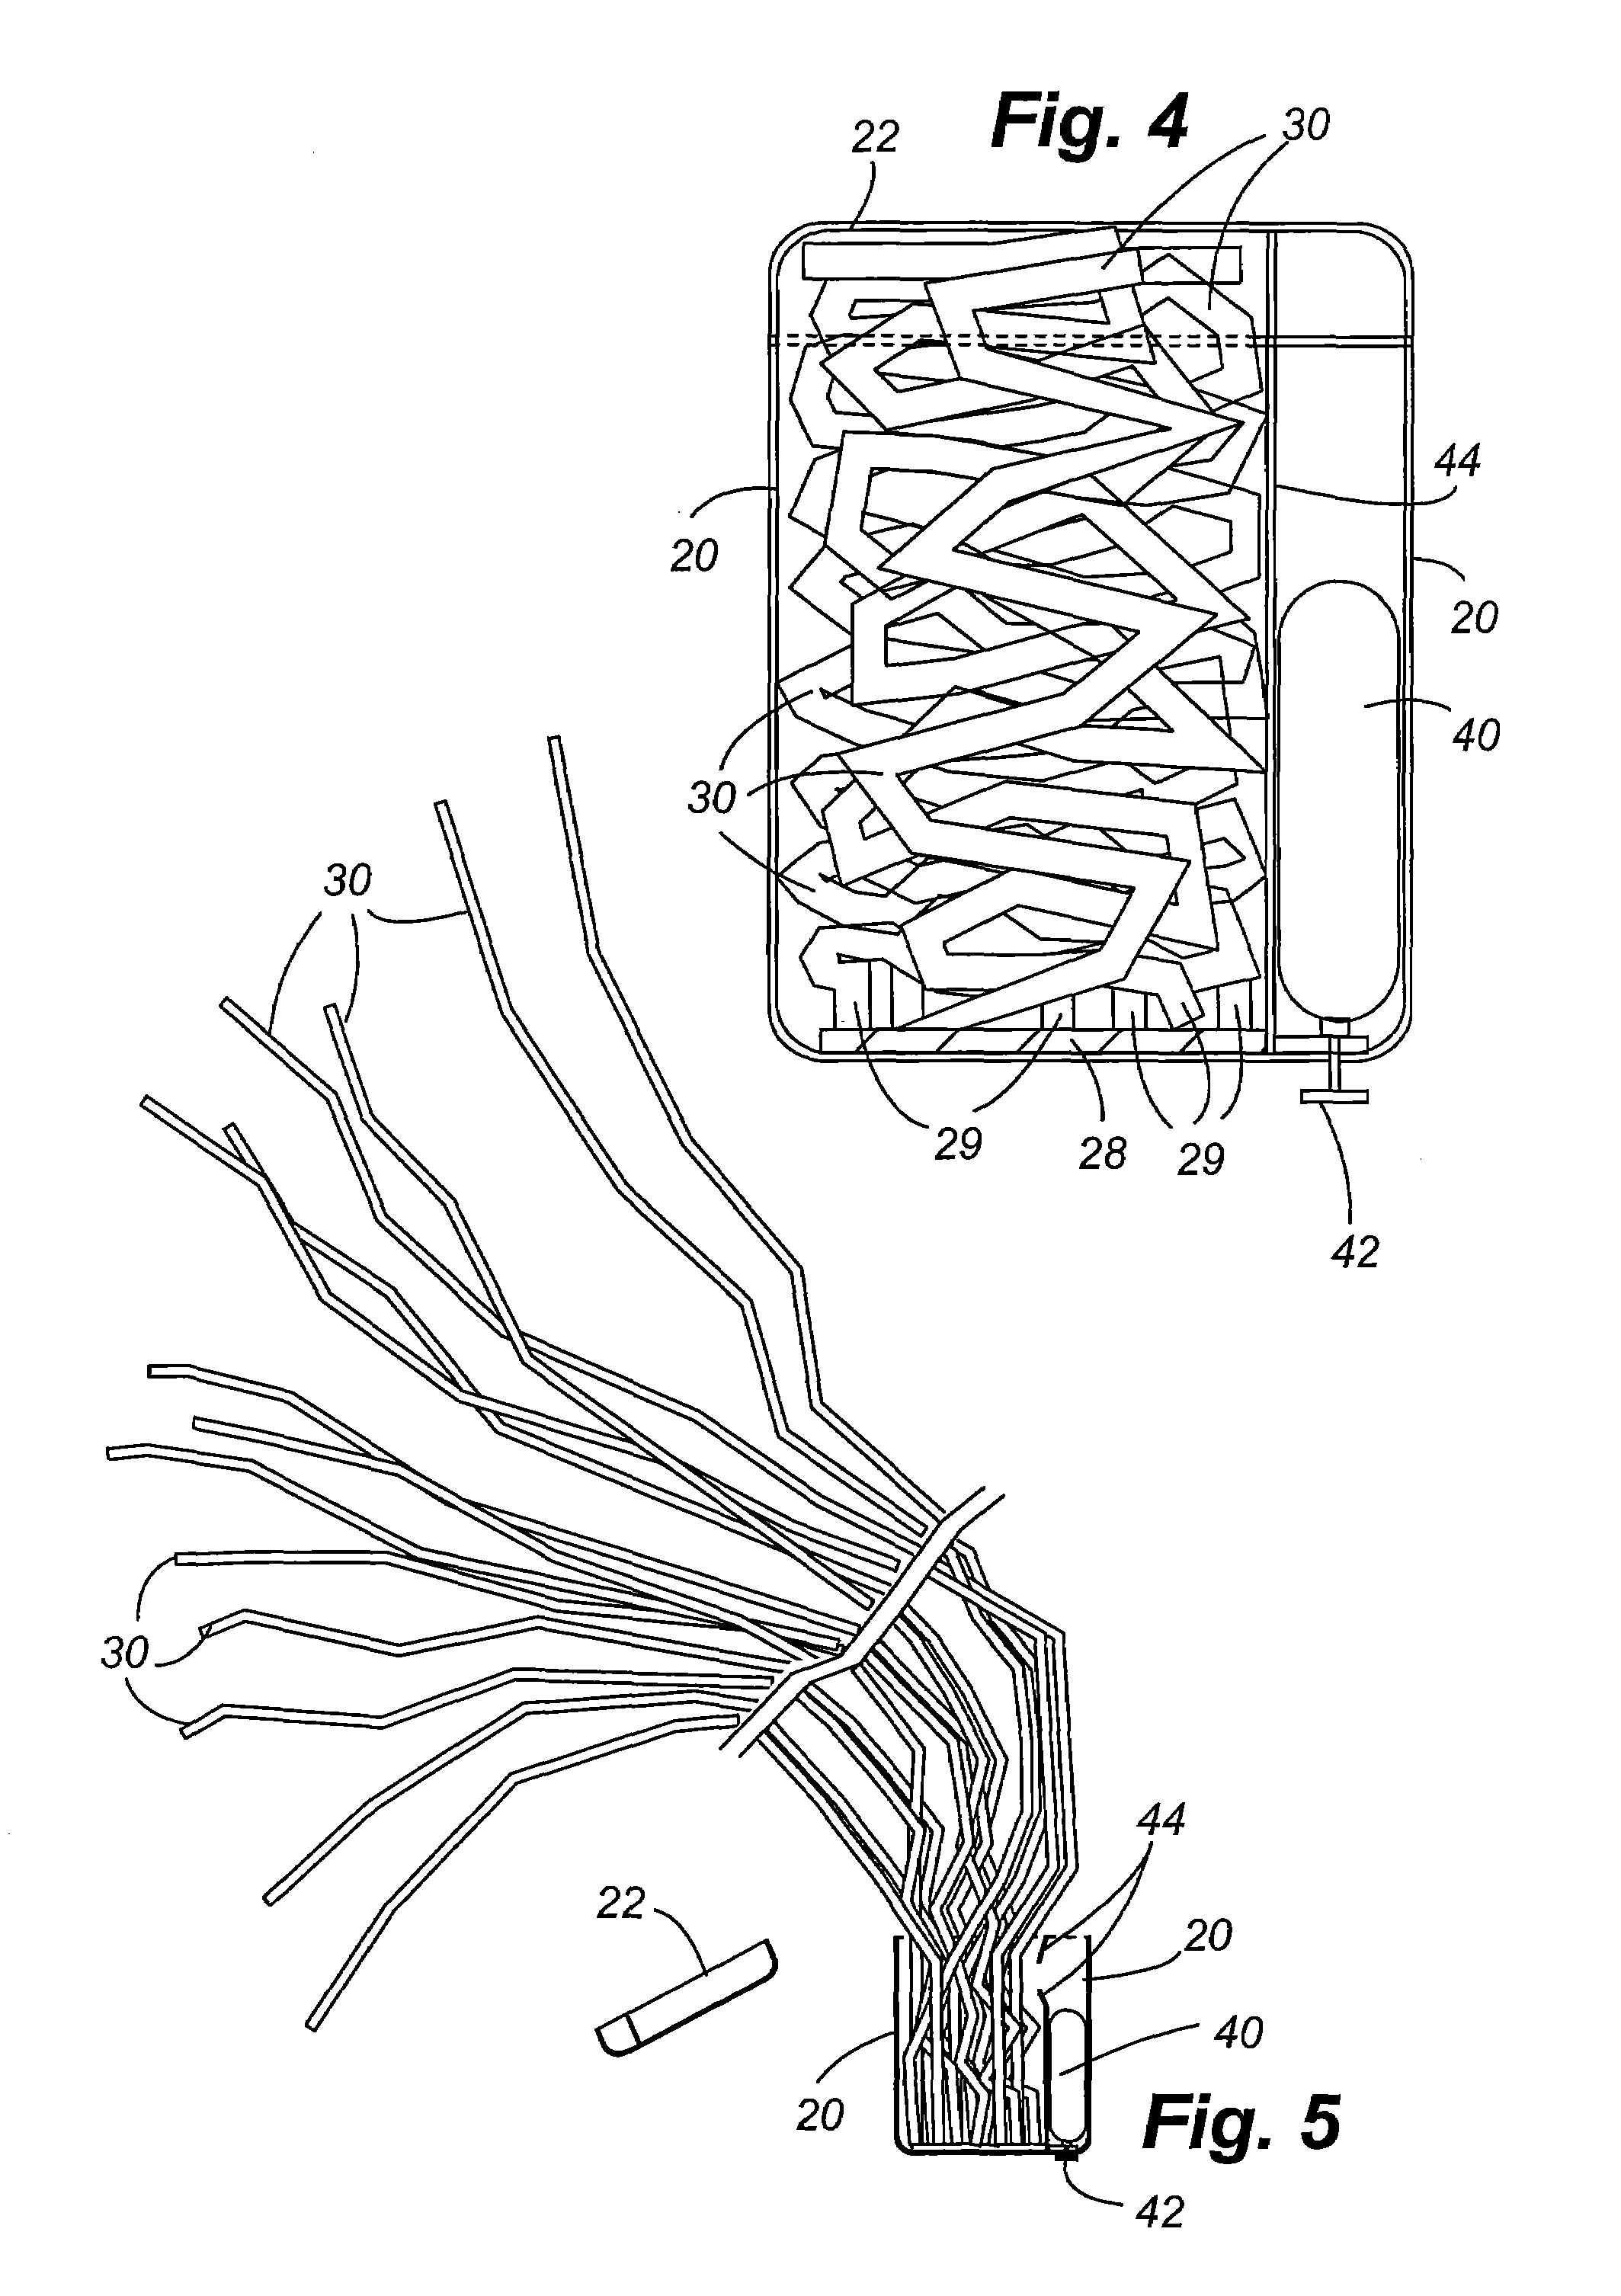 Emergency rescue device and method